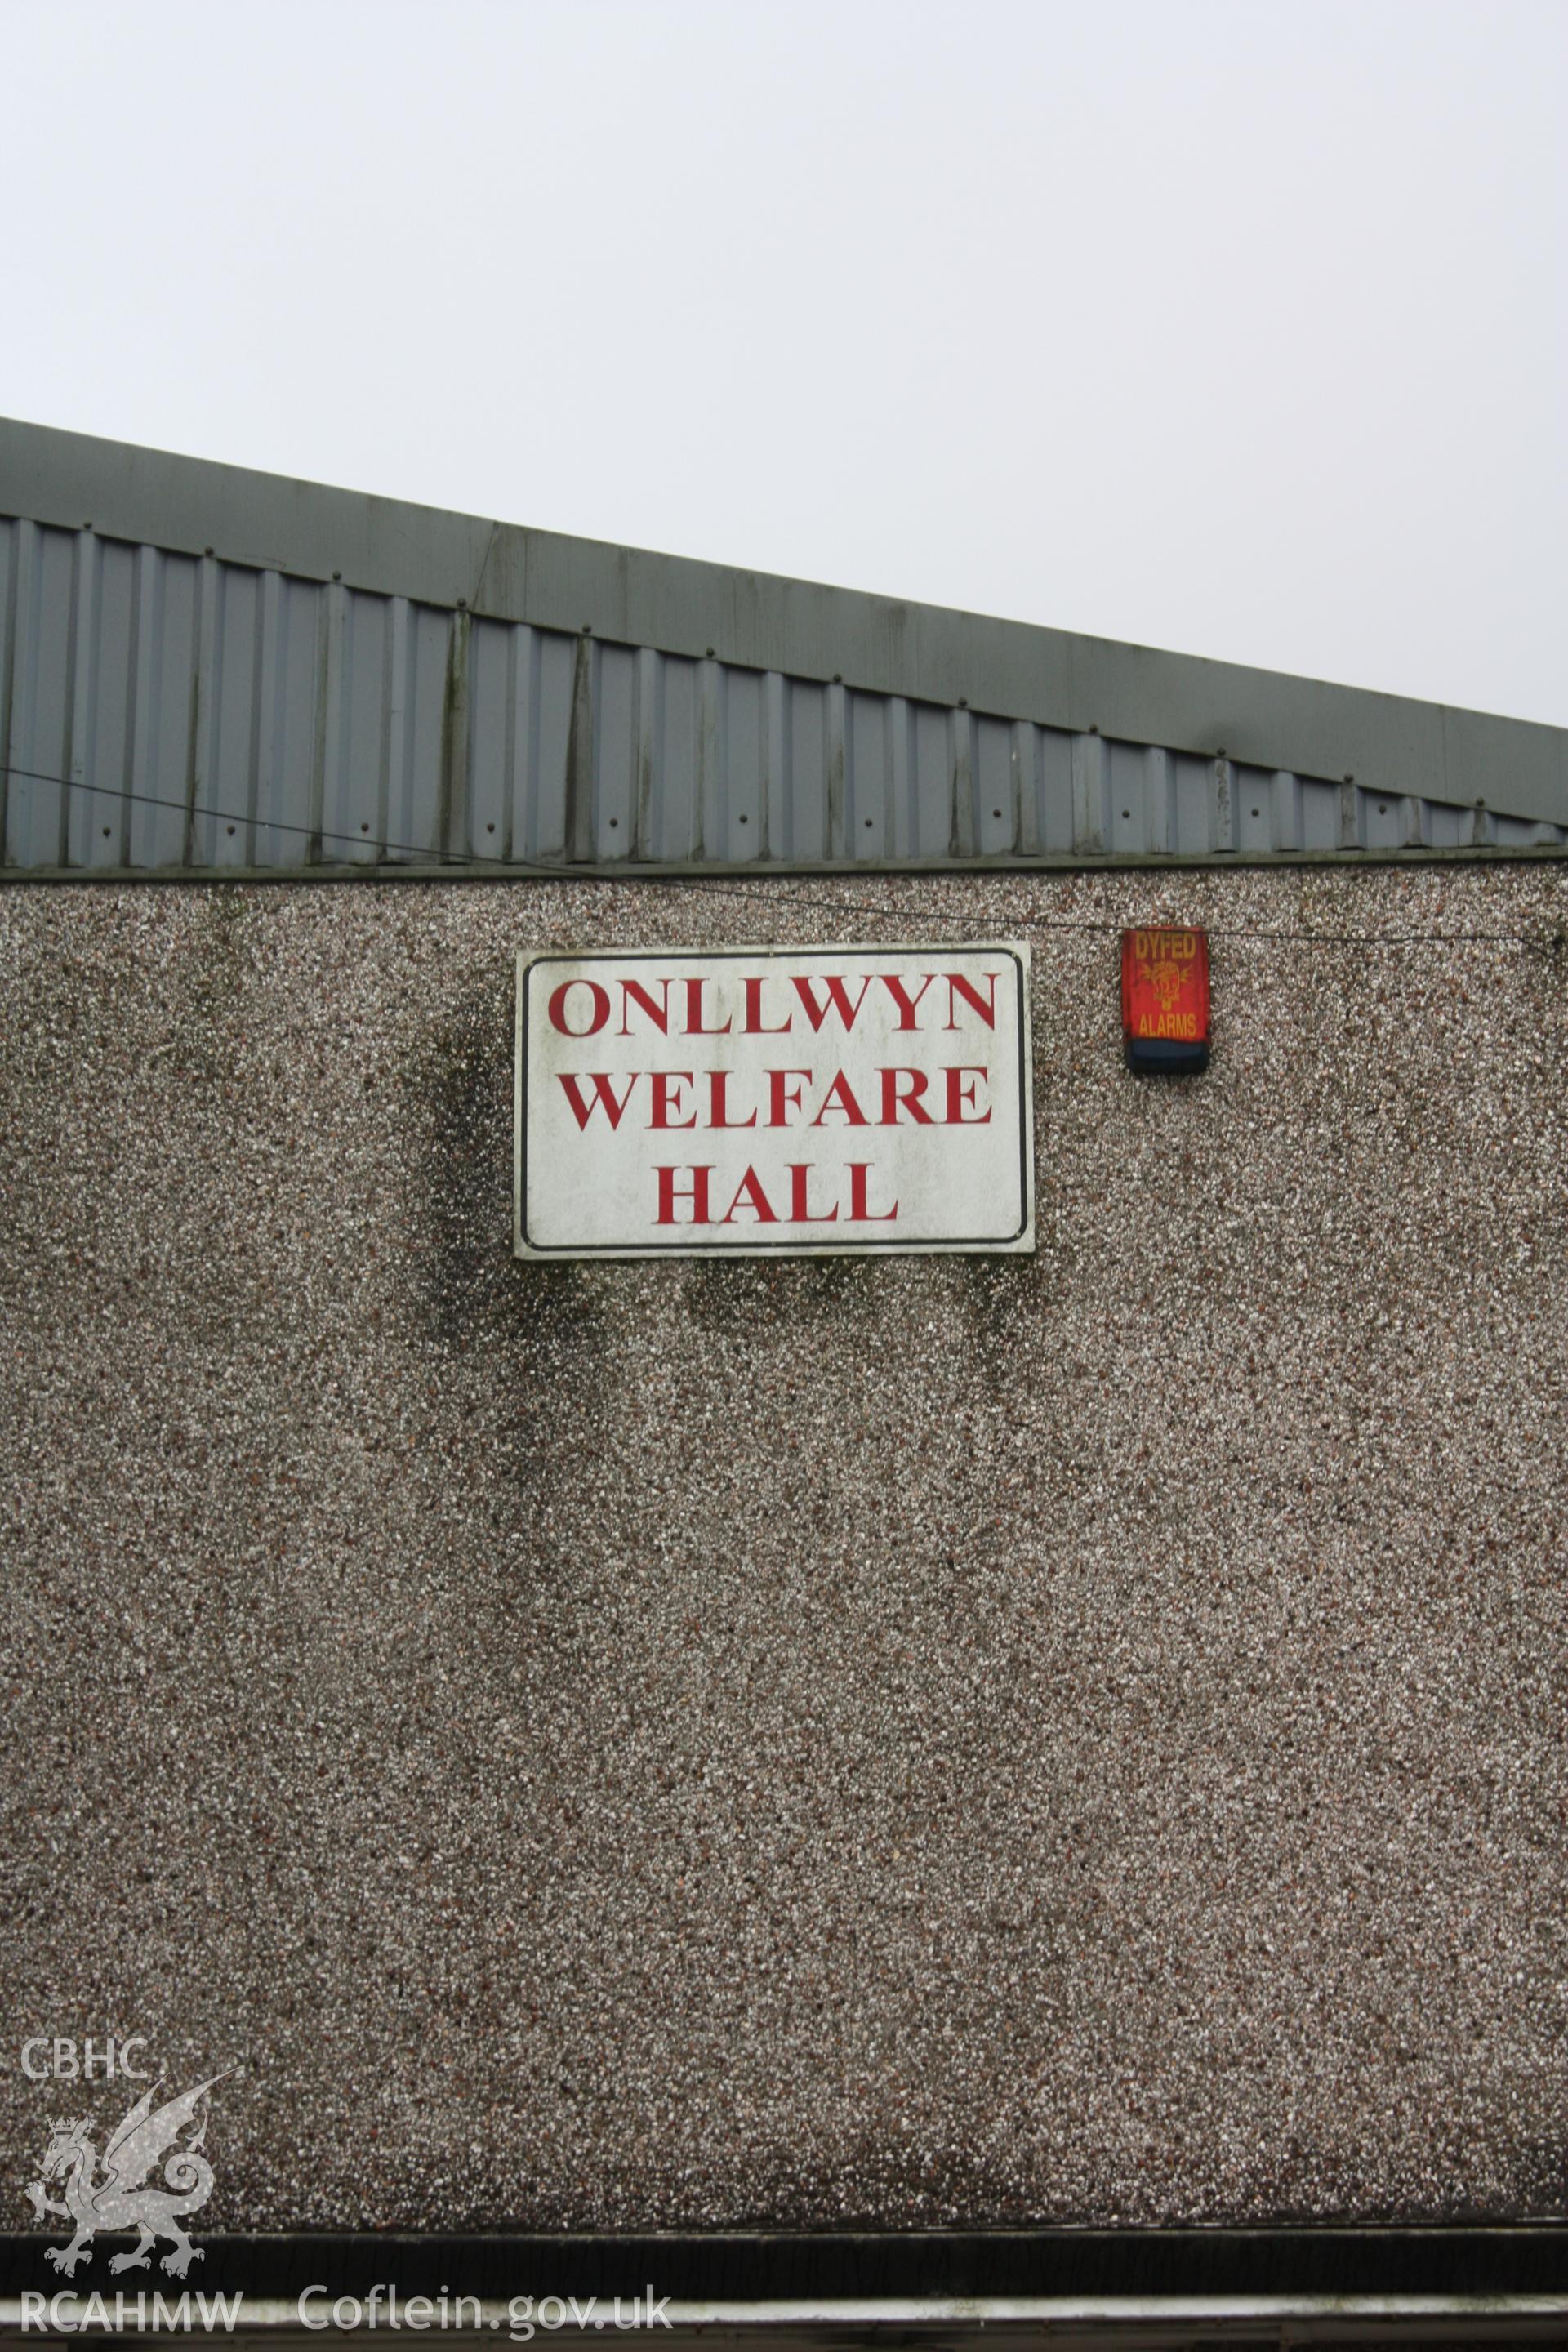 Colour photography showing the nameplate at Onllwyn Miners' Welfare Hall, taken by Nicola Roberts of RCAHMW in February 2022.